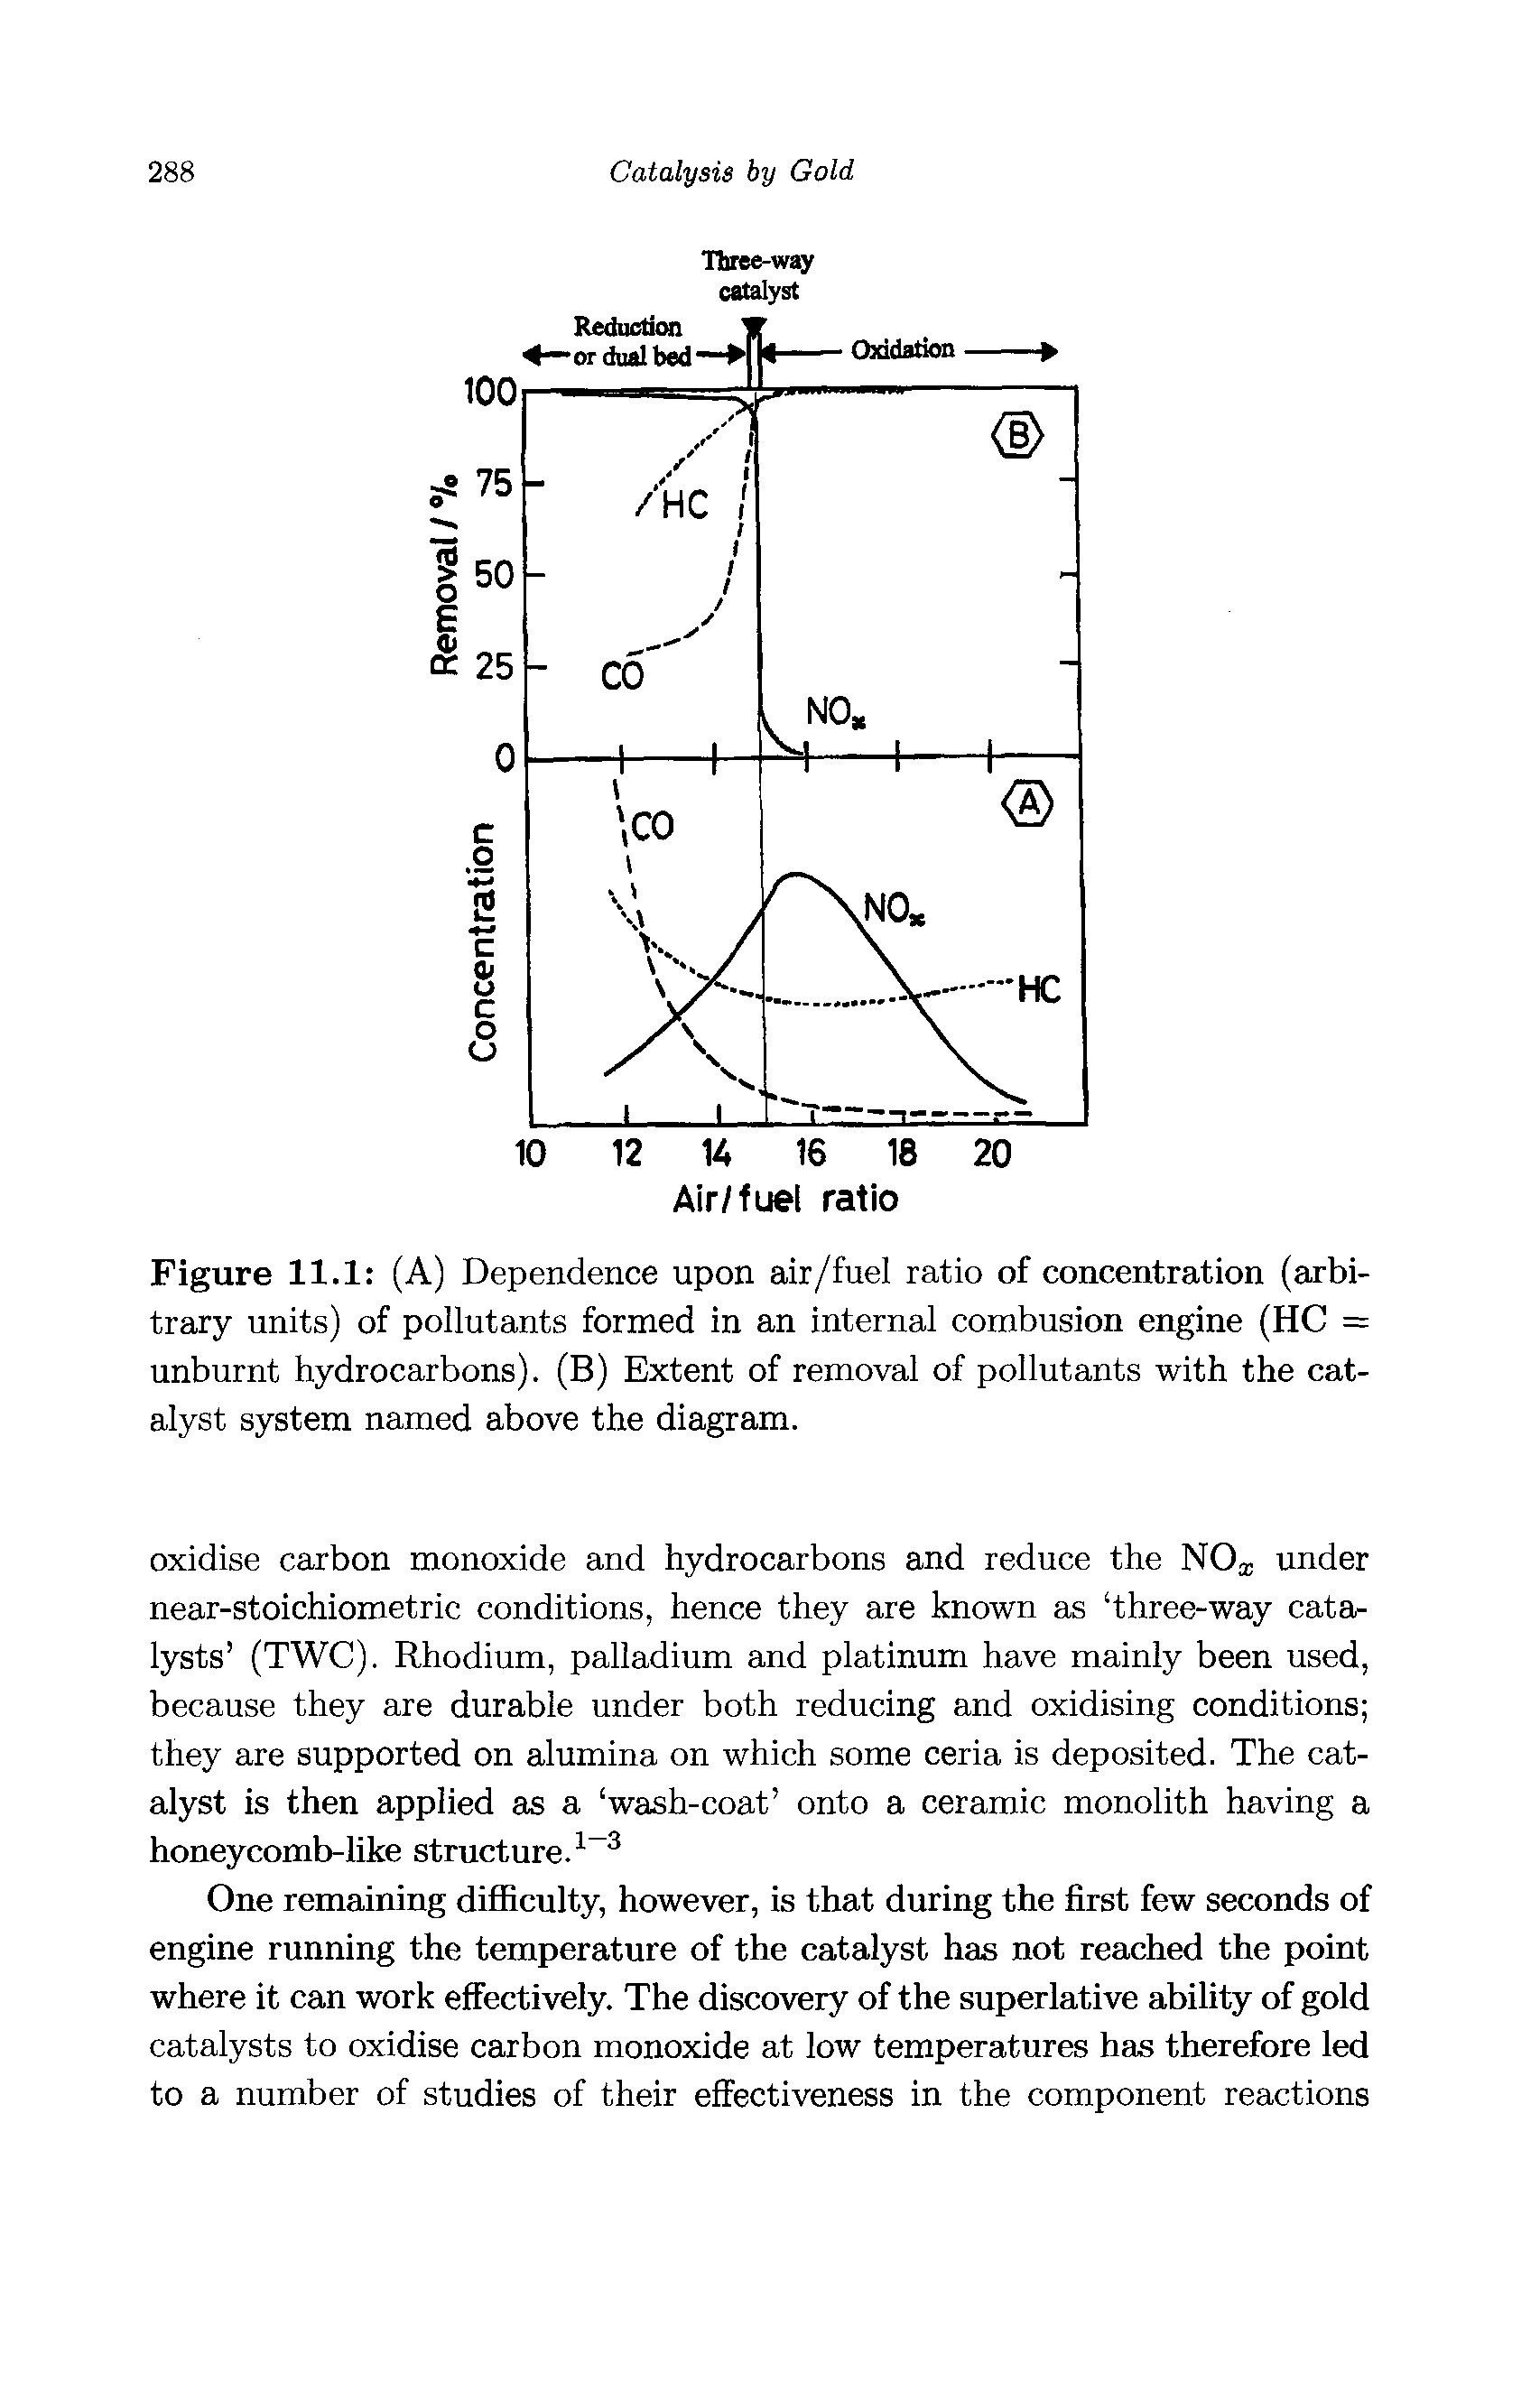 Figure 11.1 (A) Dependence upon air/fuel ratio of concentration (arbitrary units) of pollutants formed in an internal combusion engine (HC = unburnt hydrocarbons). (B) Extent of removal of pollutants with the catalyst system named above the diagram.